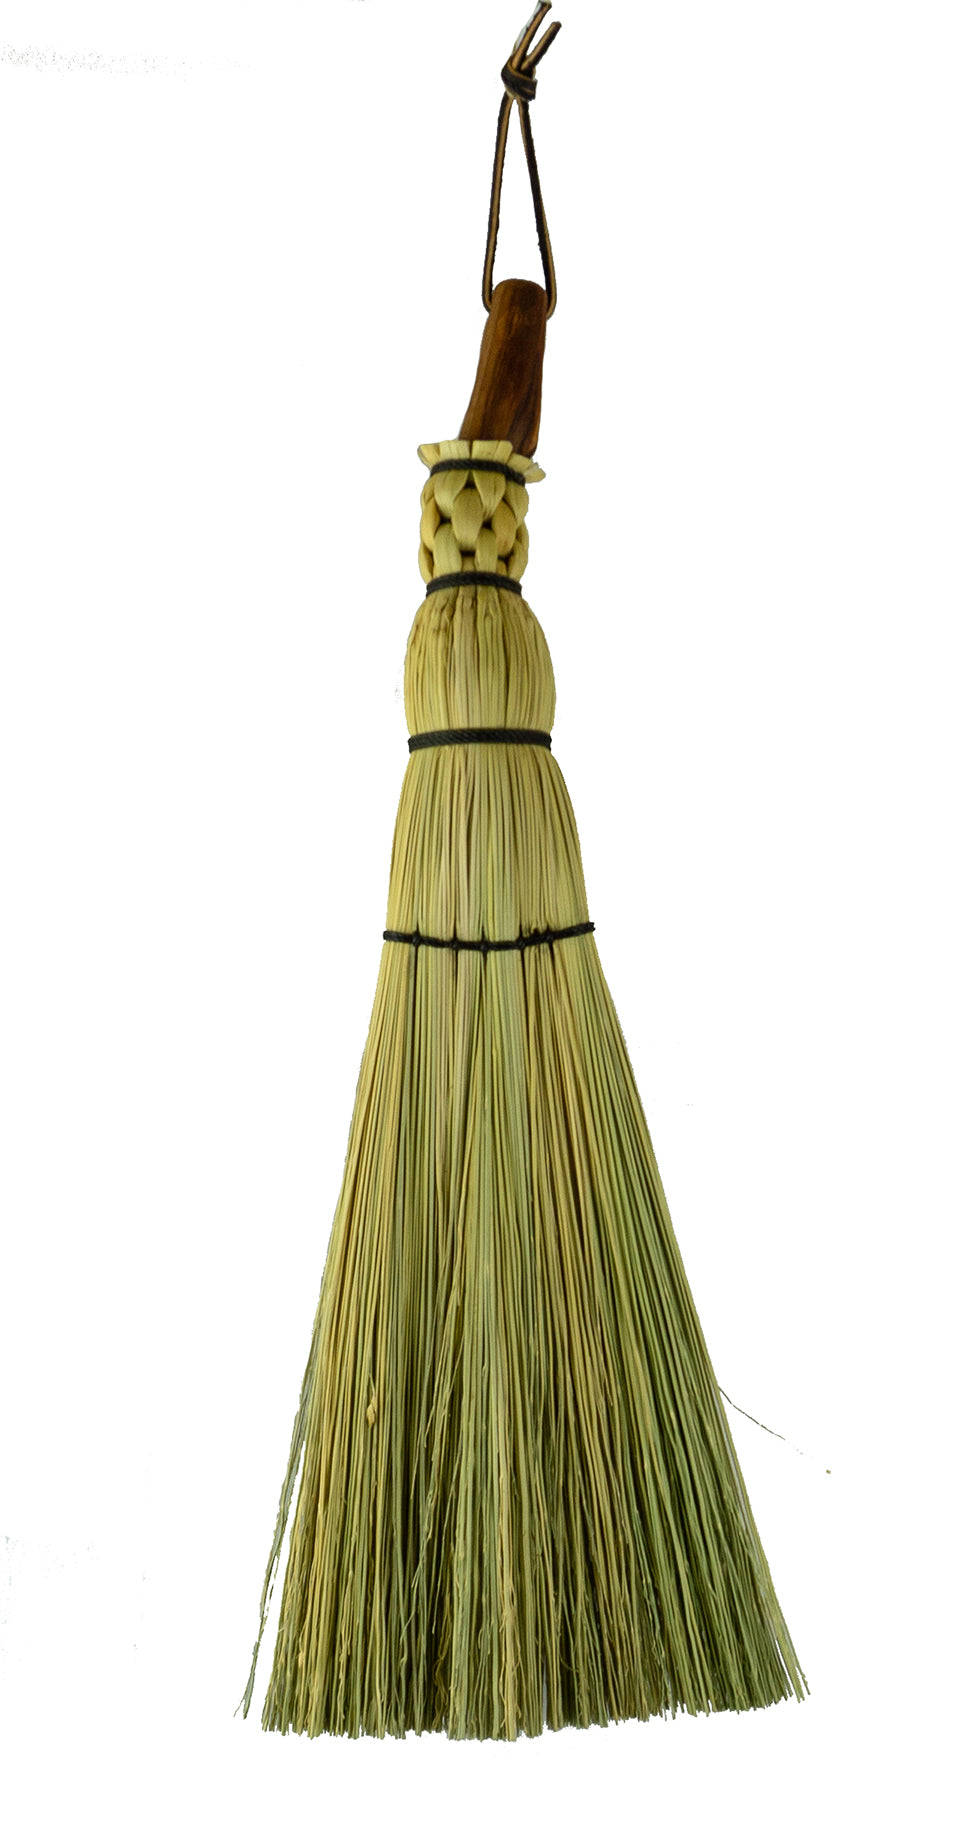 Granville Island Broom Co manzanita handle whisk brooms - traditional round and shaker flat